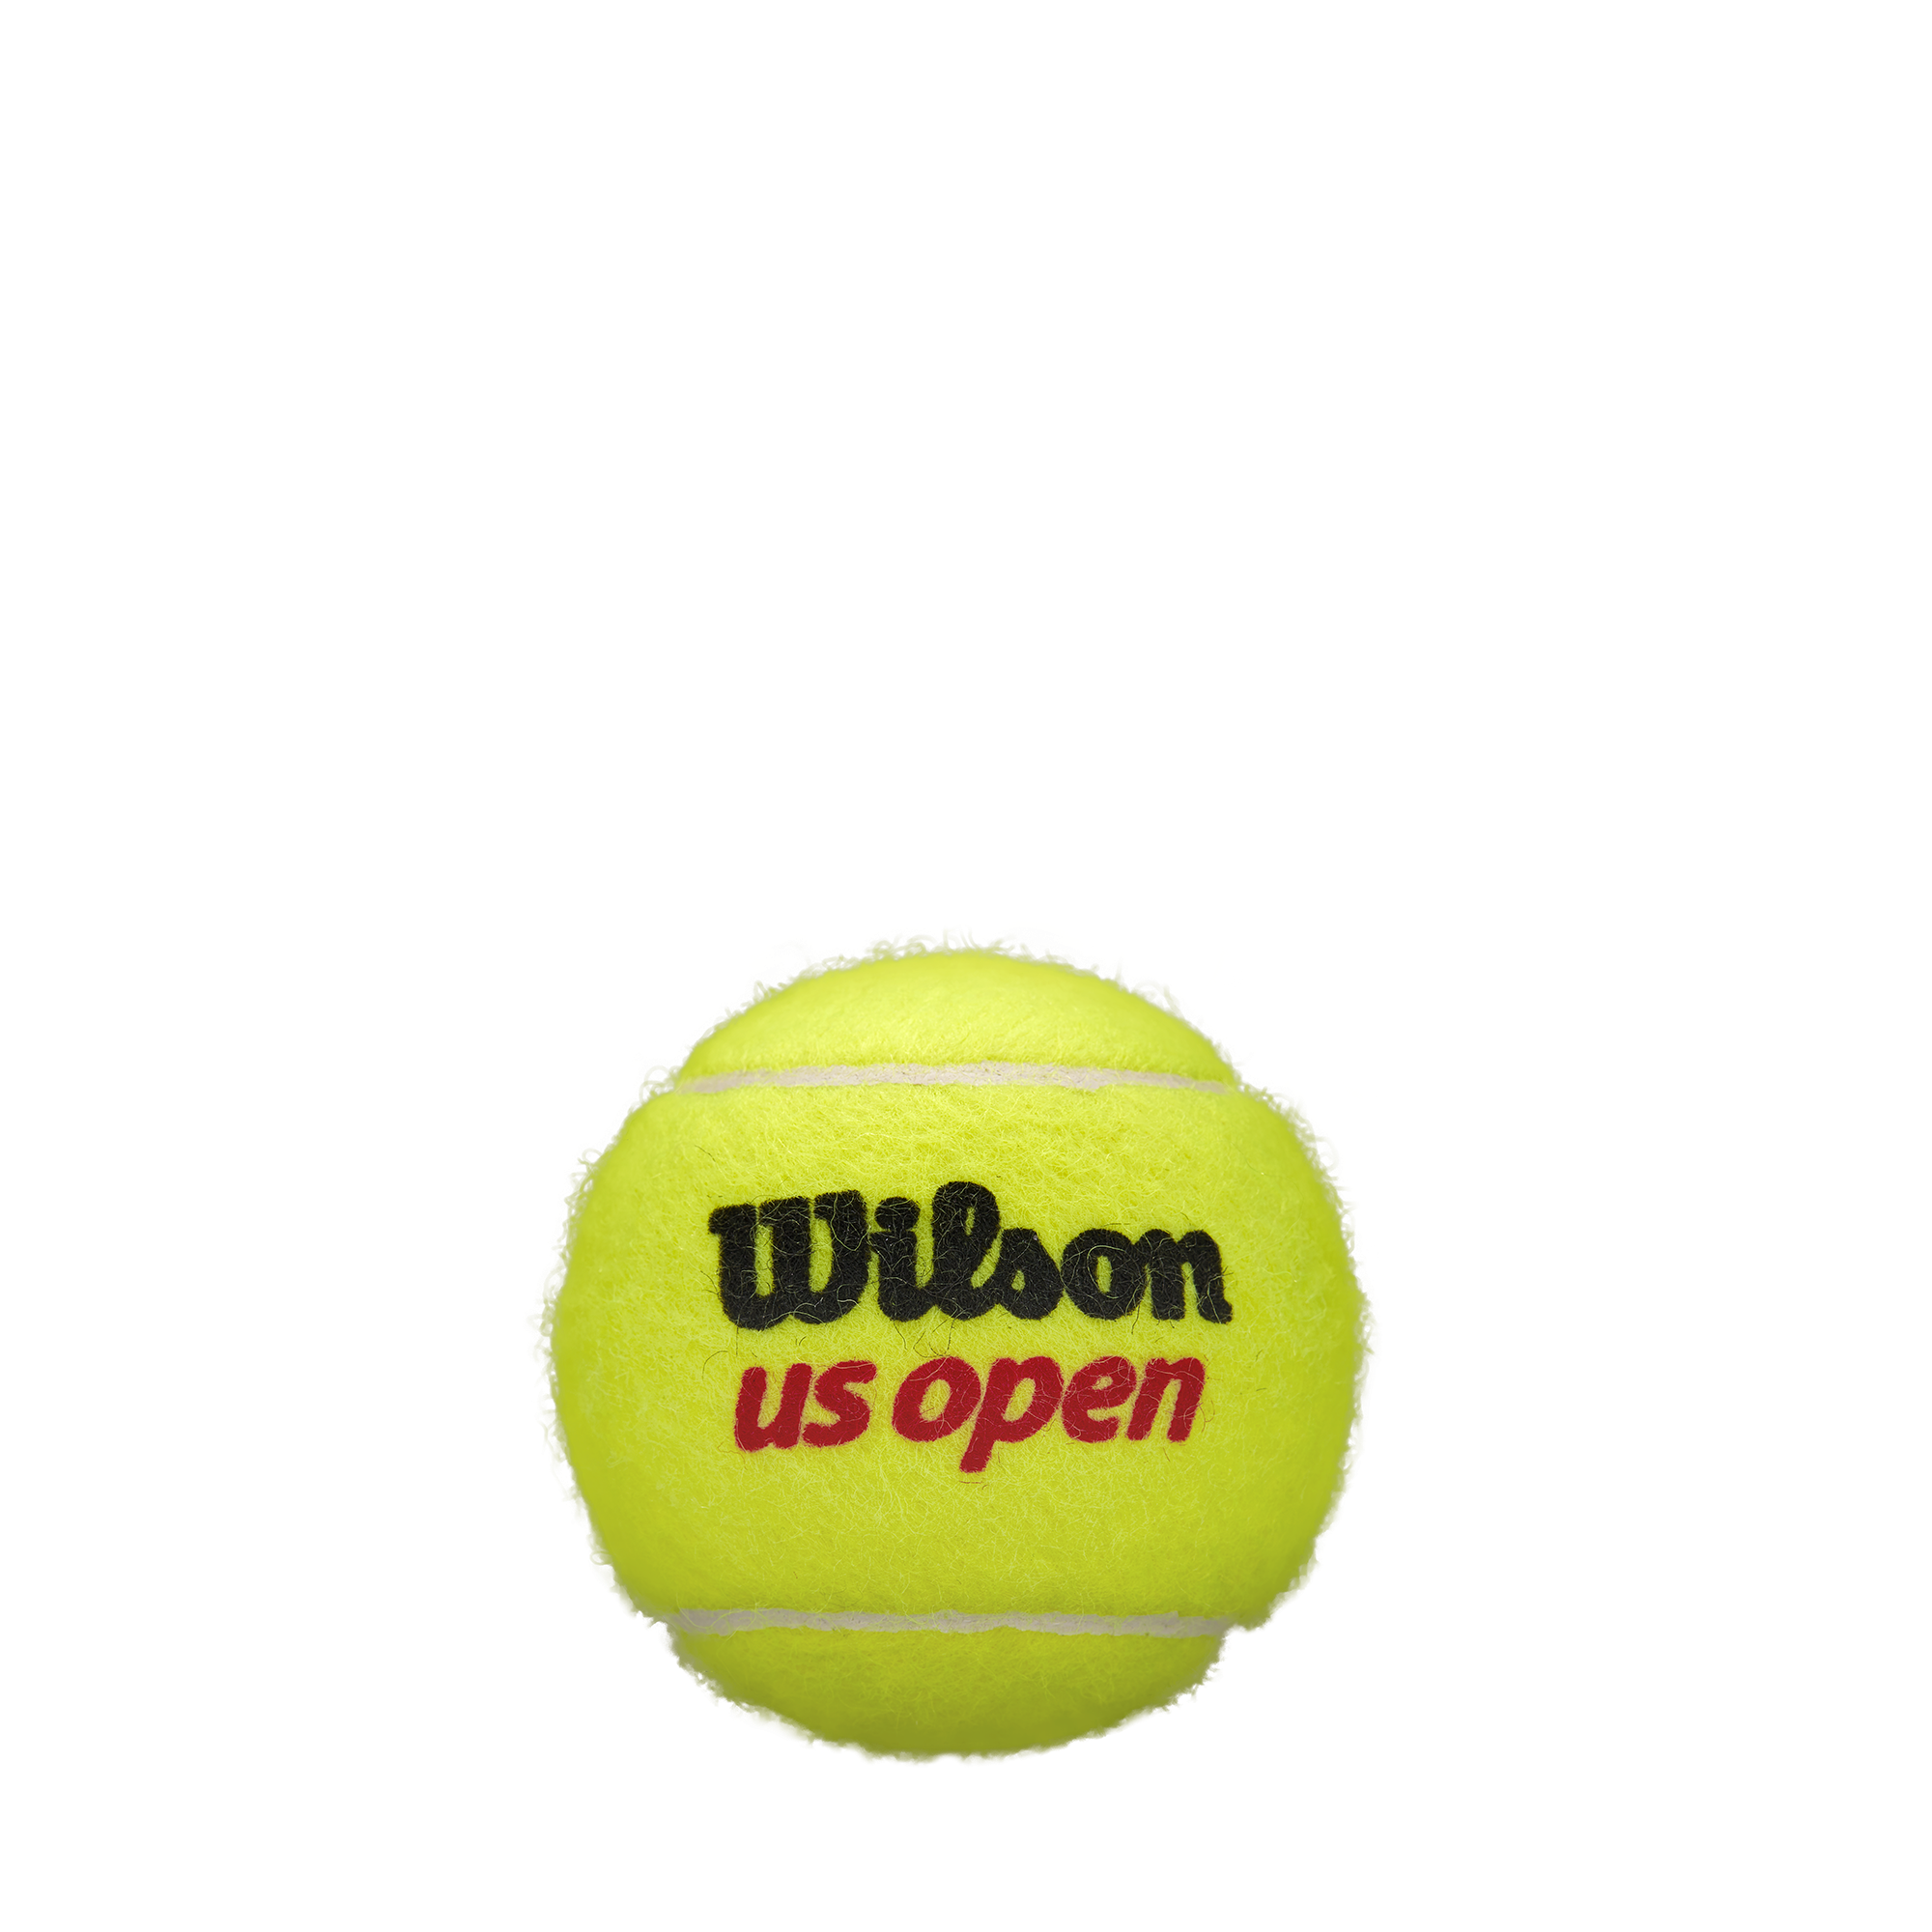 Wilson Us Open Extra Duty - Canette Individuel (3 Balles)